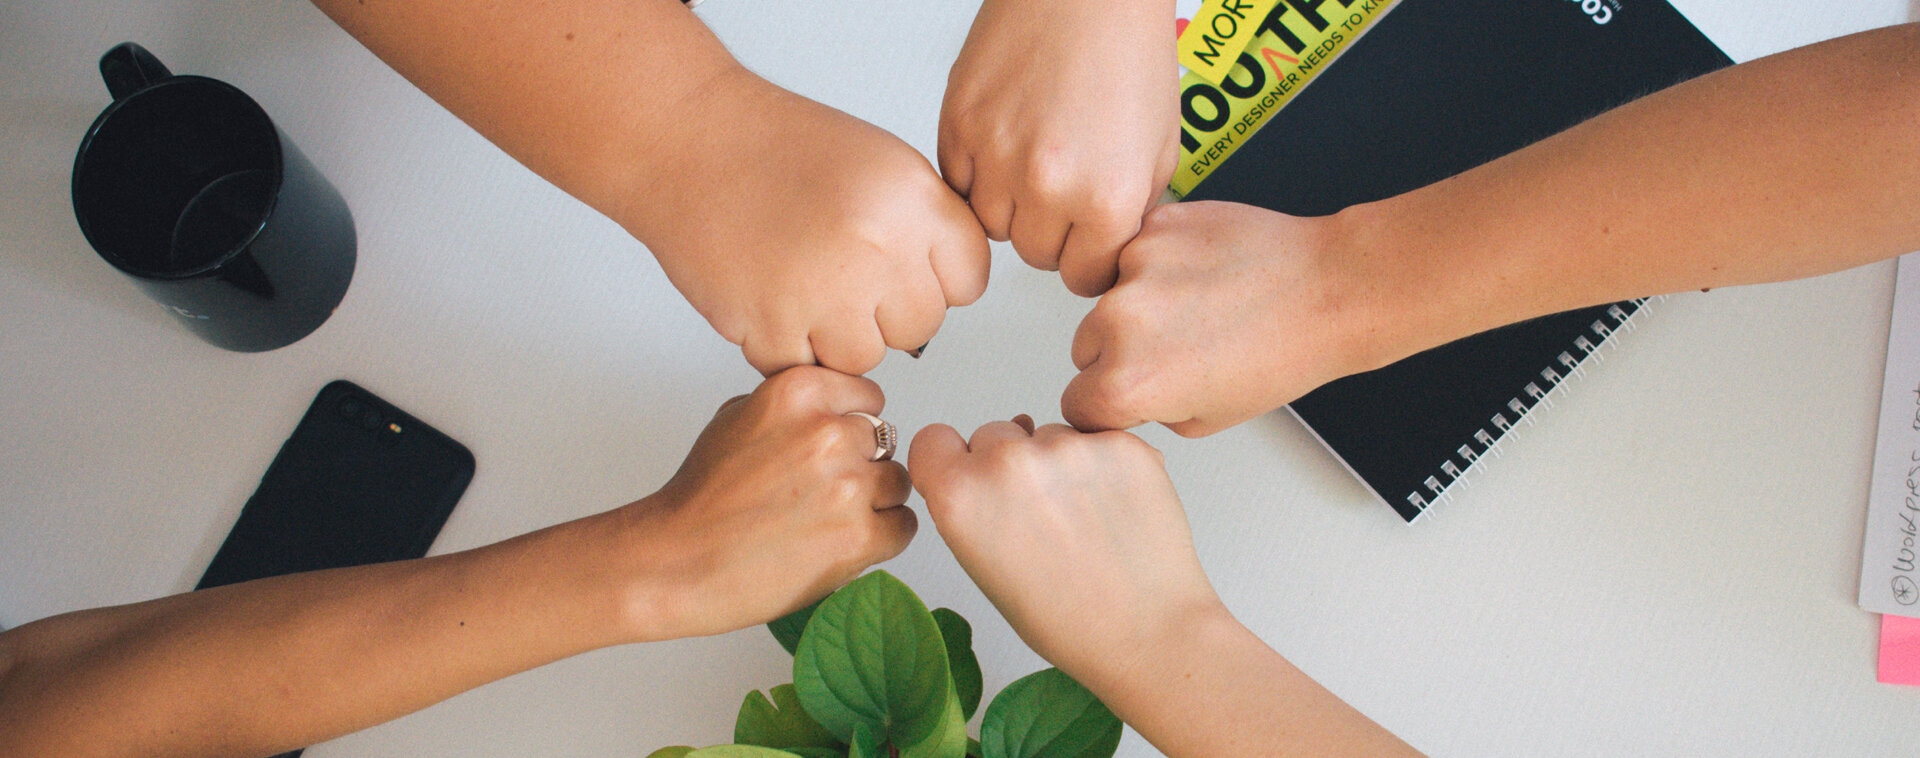 Hands in a circle as a sign of cooperation | © antonio-janeski-CHVTt0aGbx0-unsplash.jpg